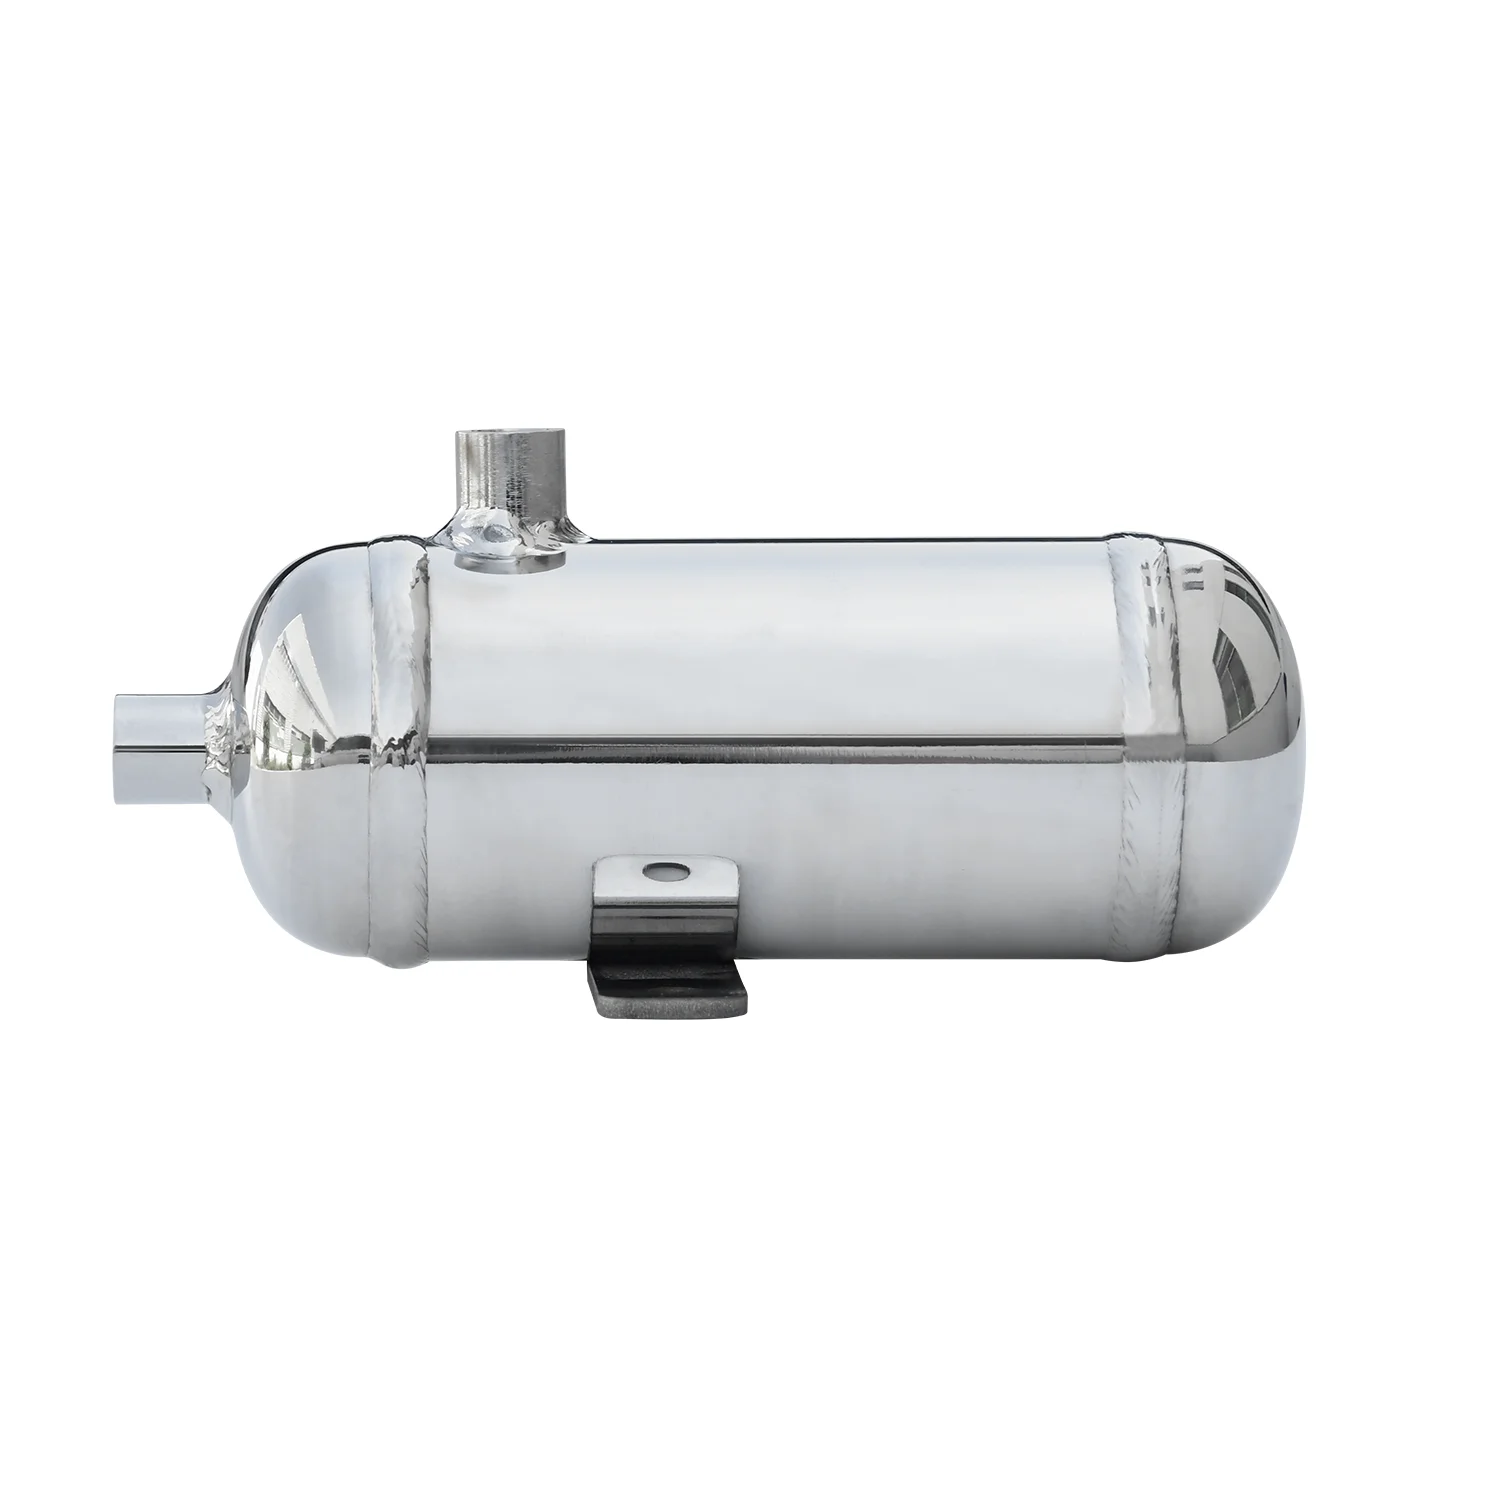 0.3L 304 Stainless Steel Small Horizontal Air Compression Tank